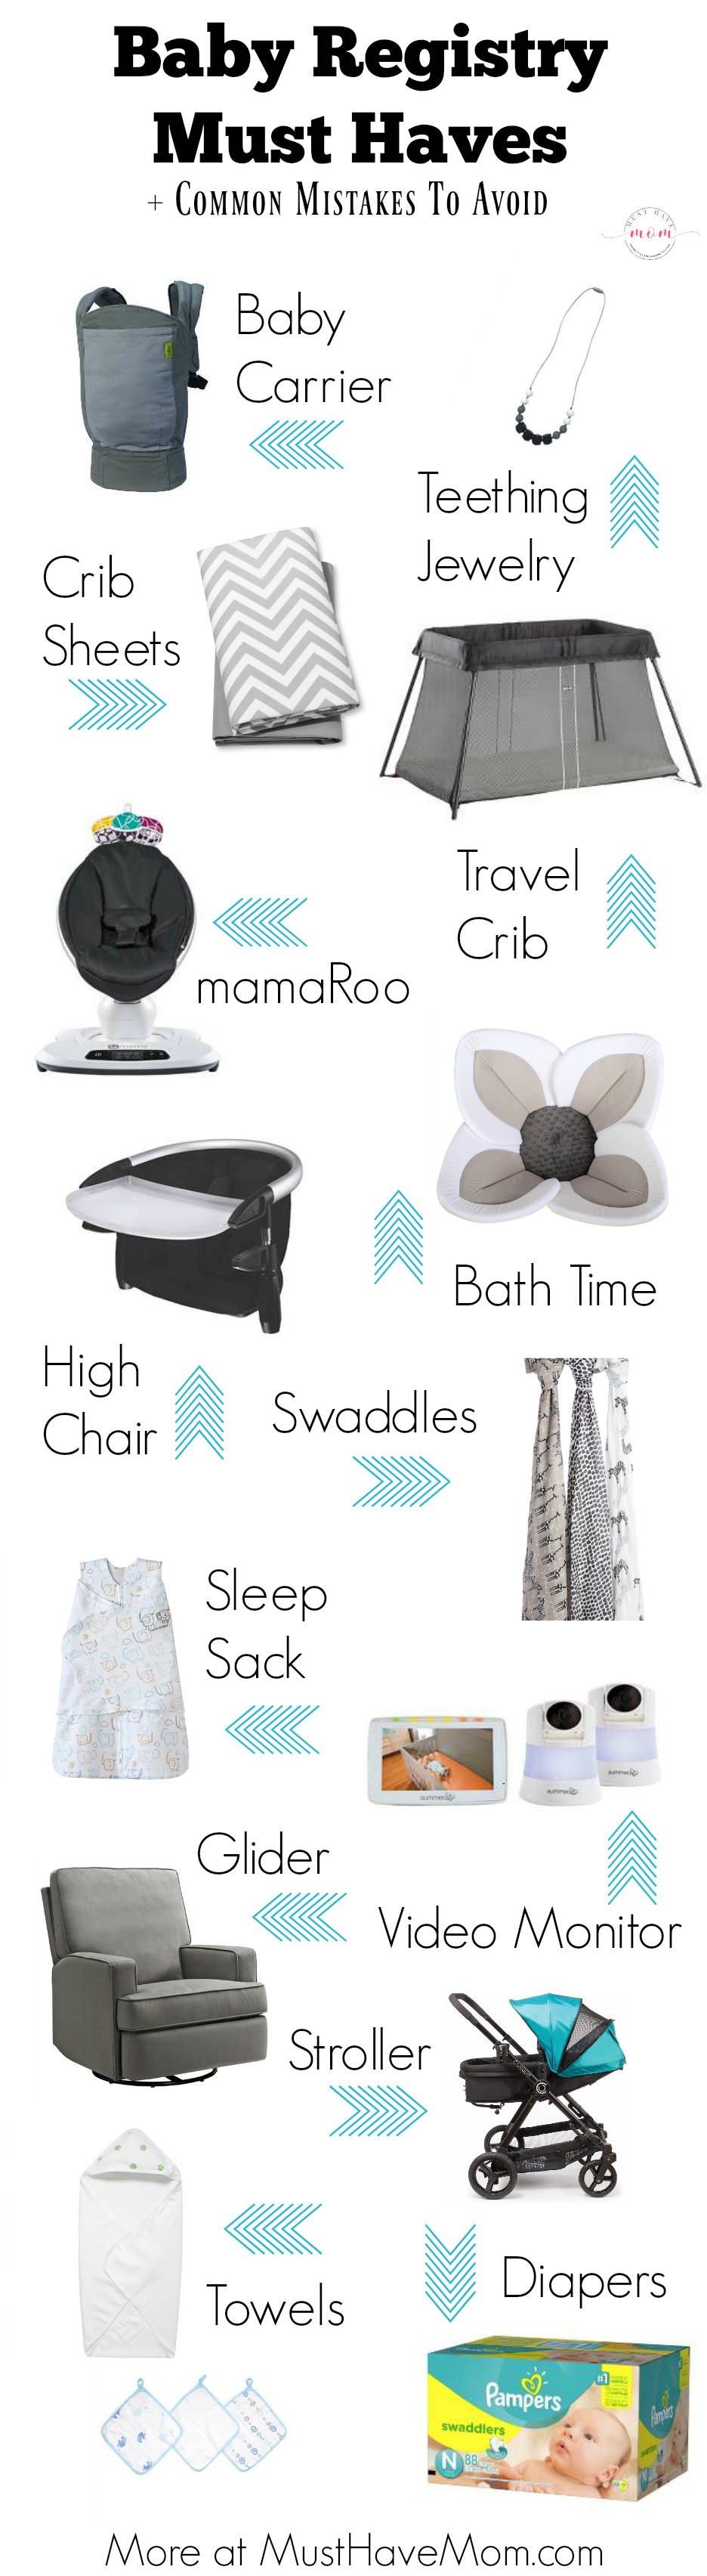 Baby registry must haves for new moms! Read this baby registry essentials checklist plus registry do's and don'ts. A must read for new moms.